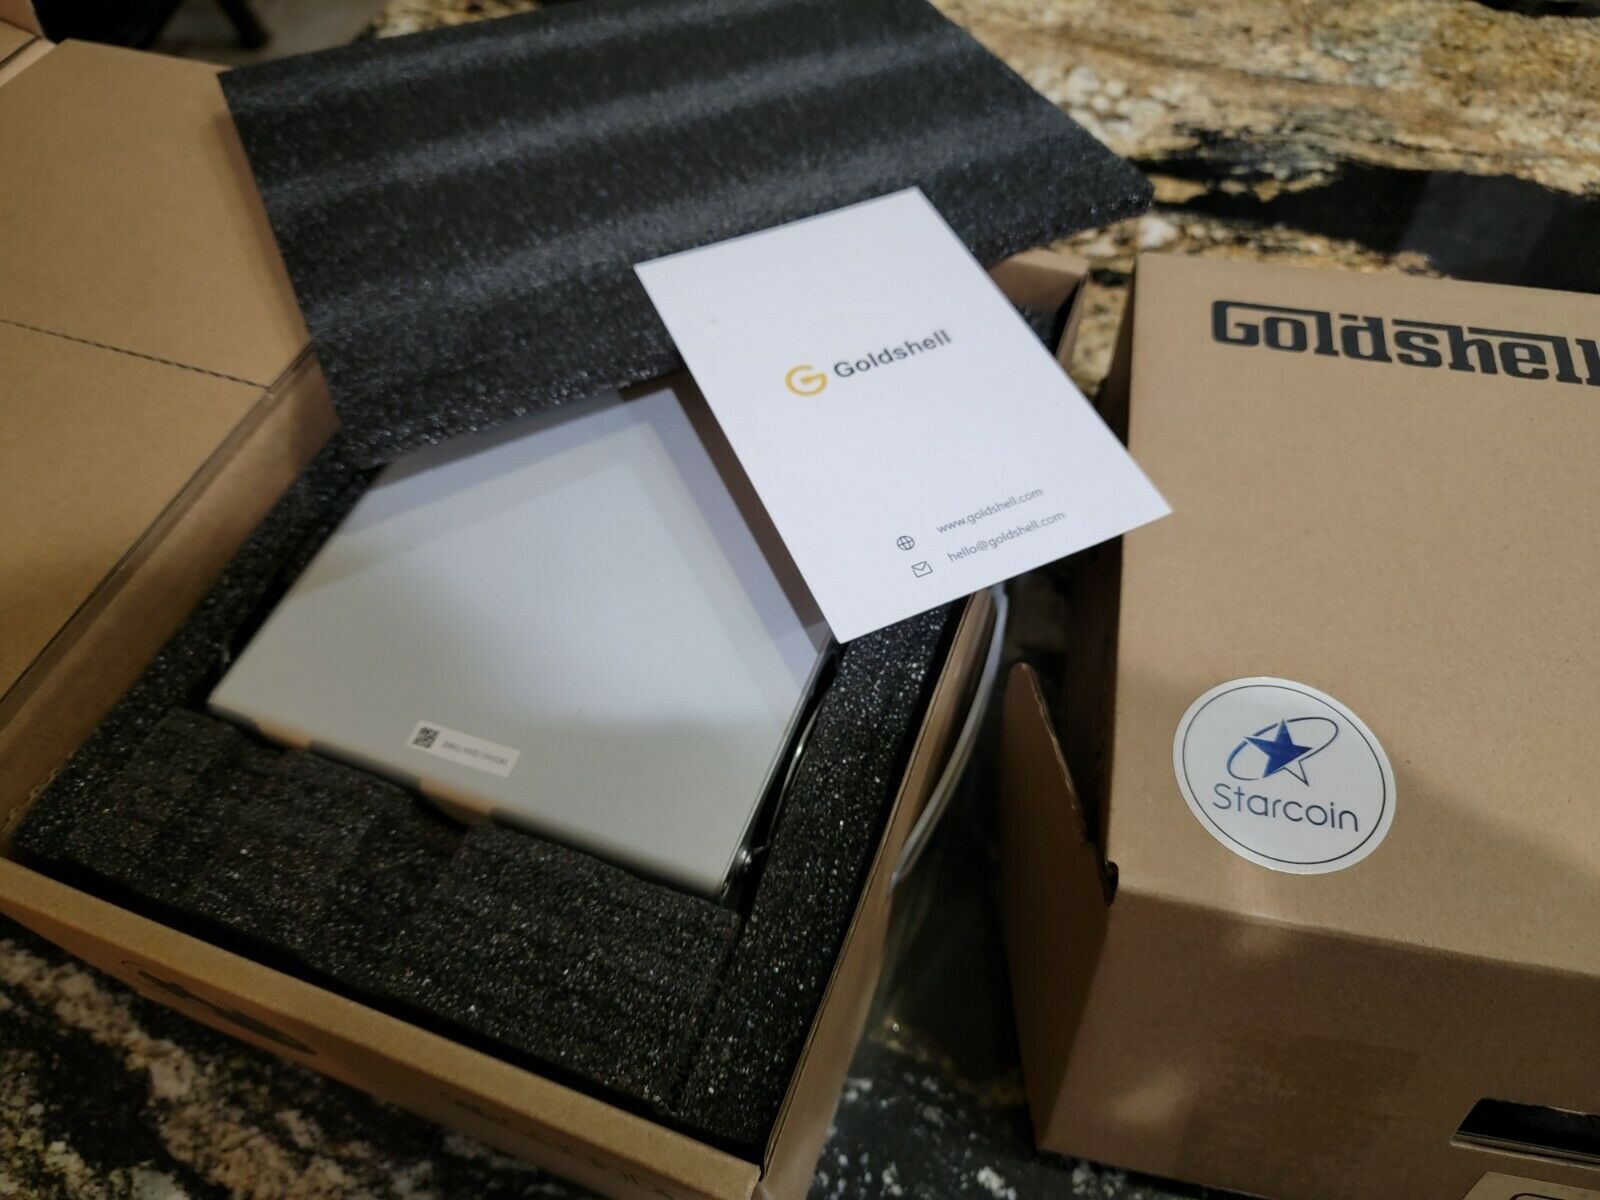 New Goldshell St Box Starcoin Miner 13.9khs 61w Without Power Supply (10)